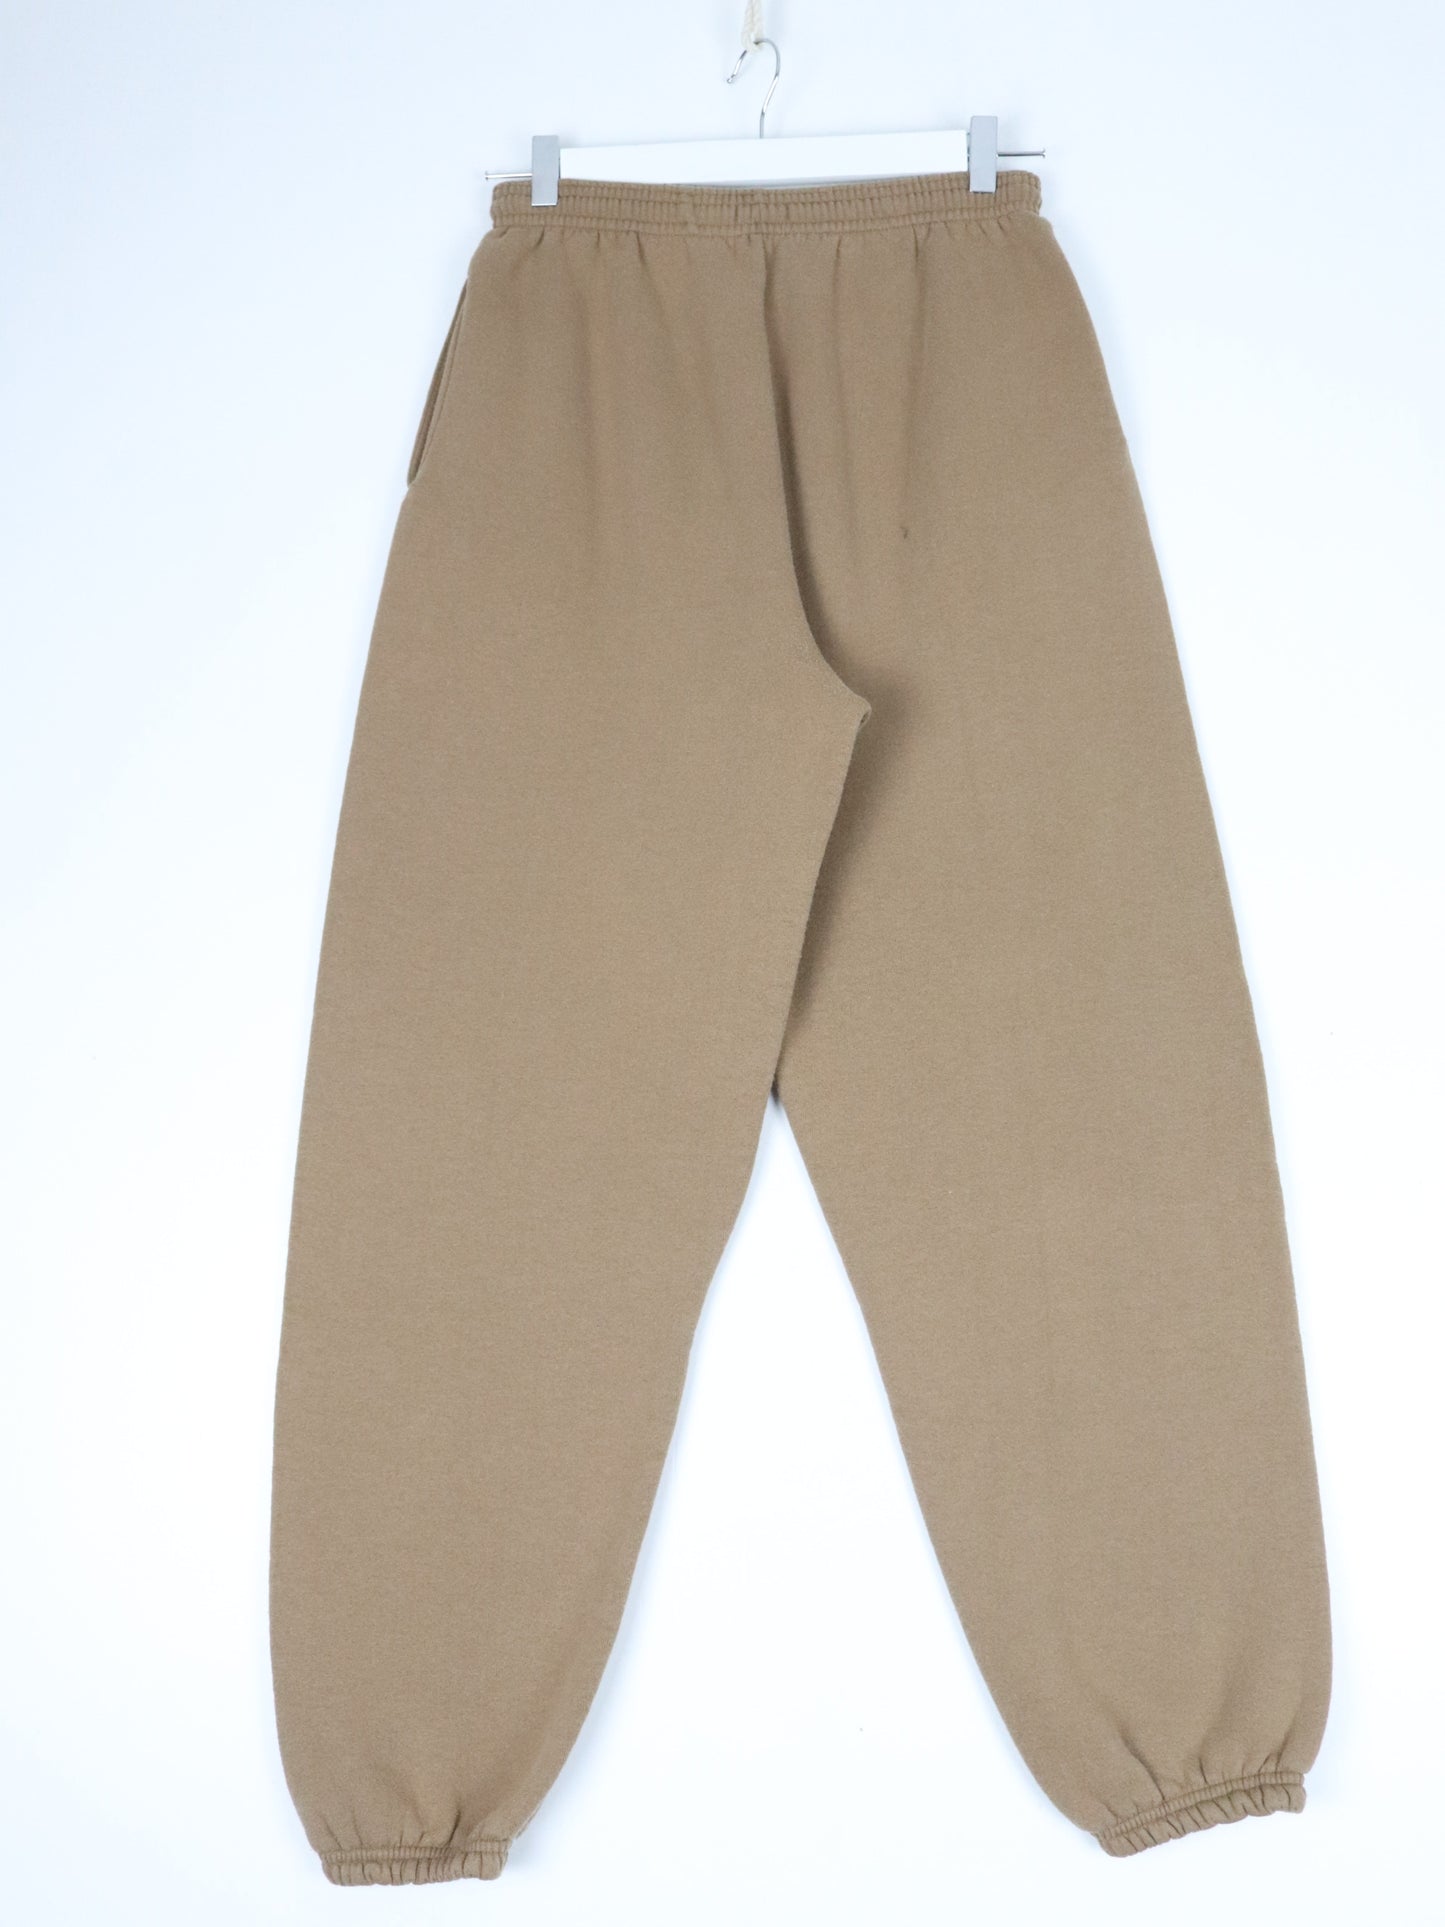 Vintage Hanes Pants Mens Small Beige Cuffed Sweat Athletic 90s 24 x 28